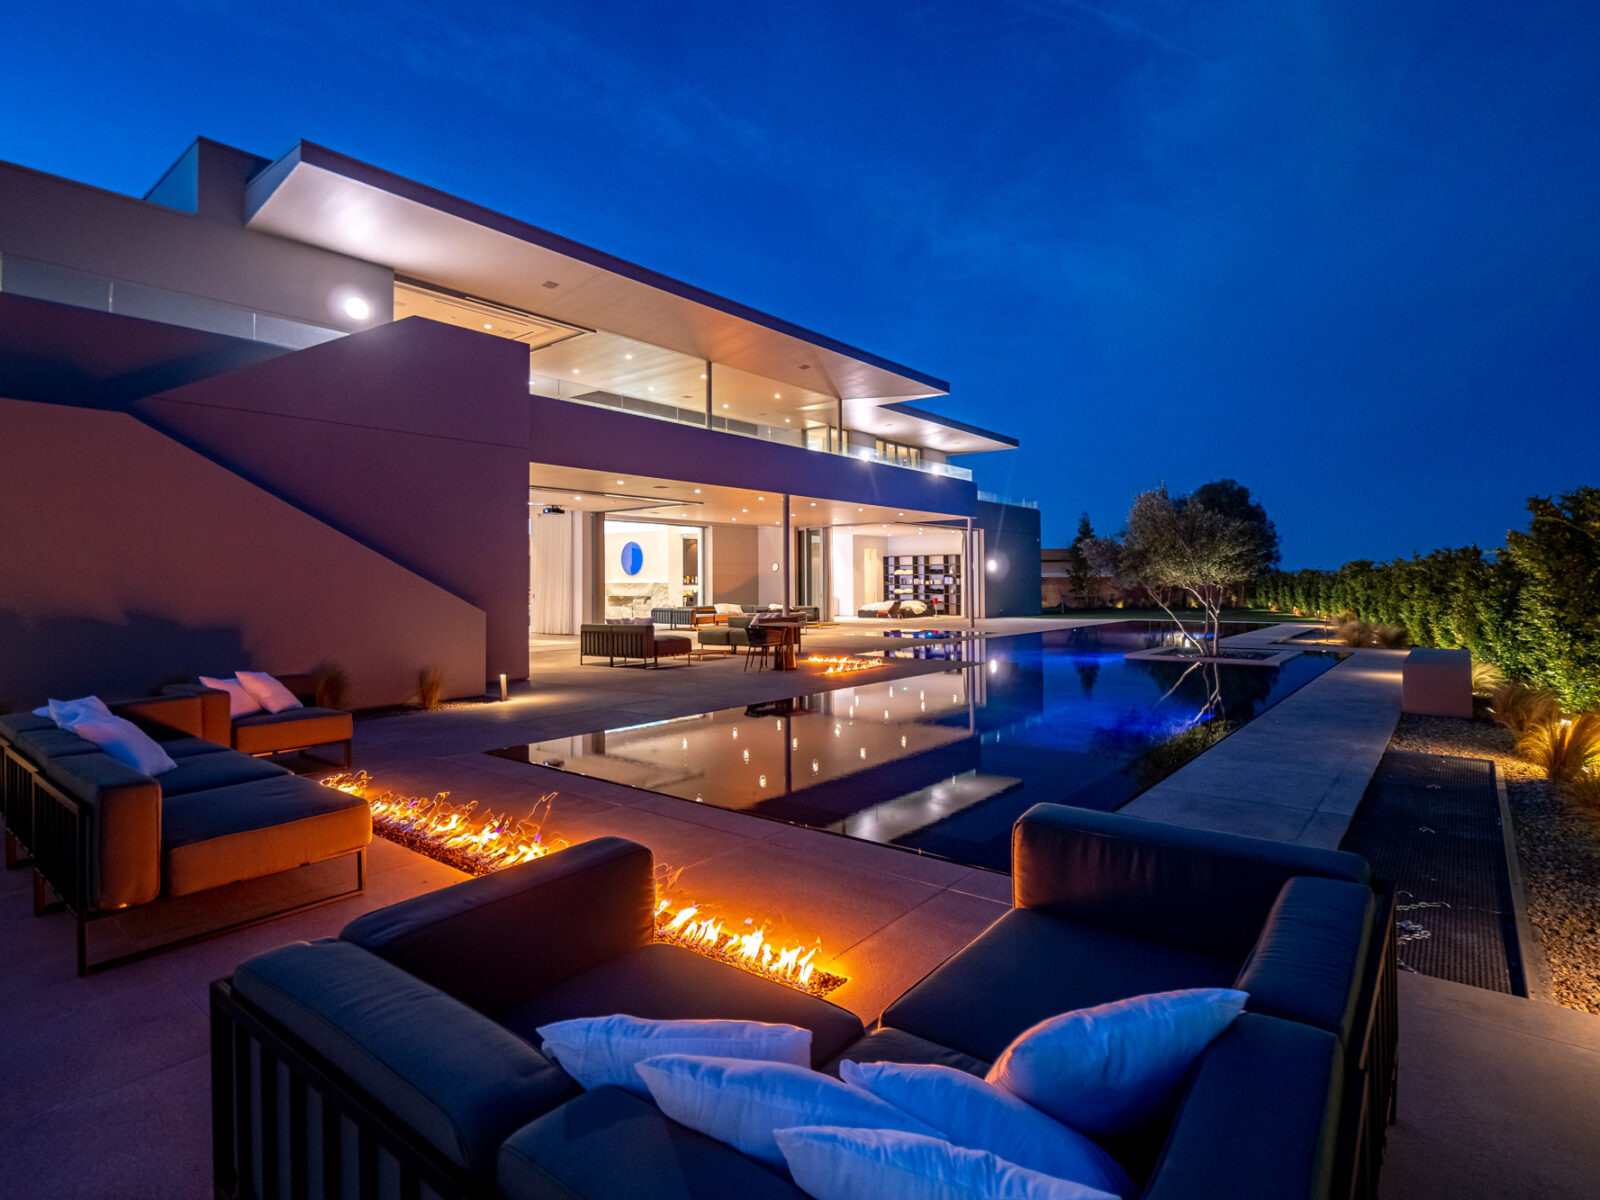 Fireplace And Swimming Pool At Night At An Ultra-Modern Las Vegas Home